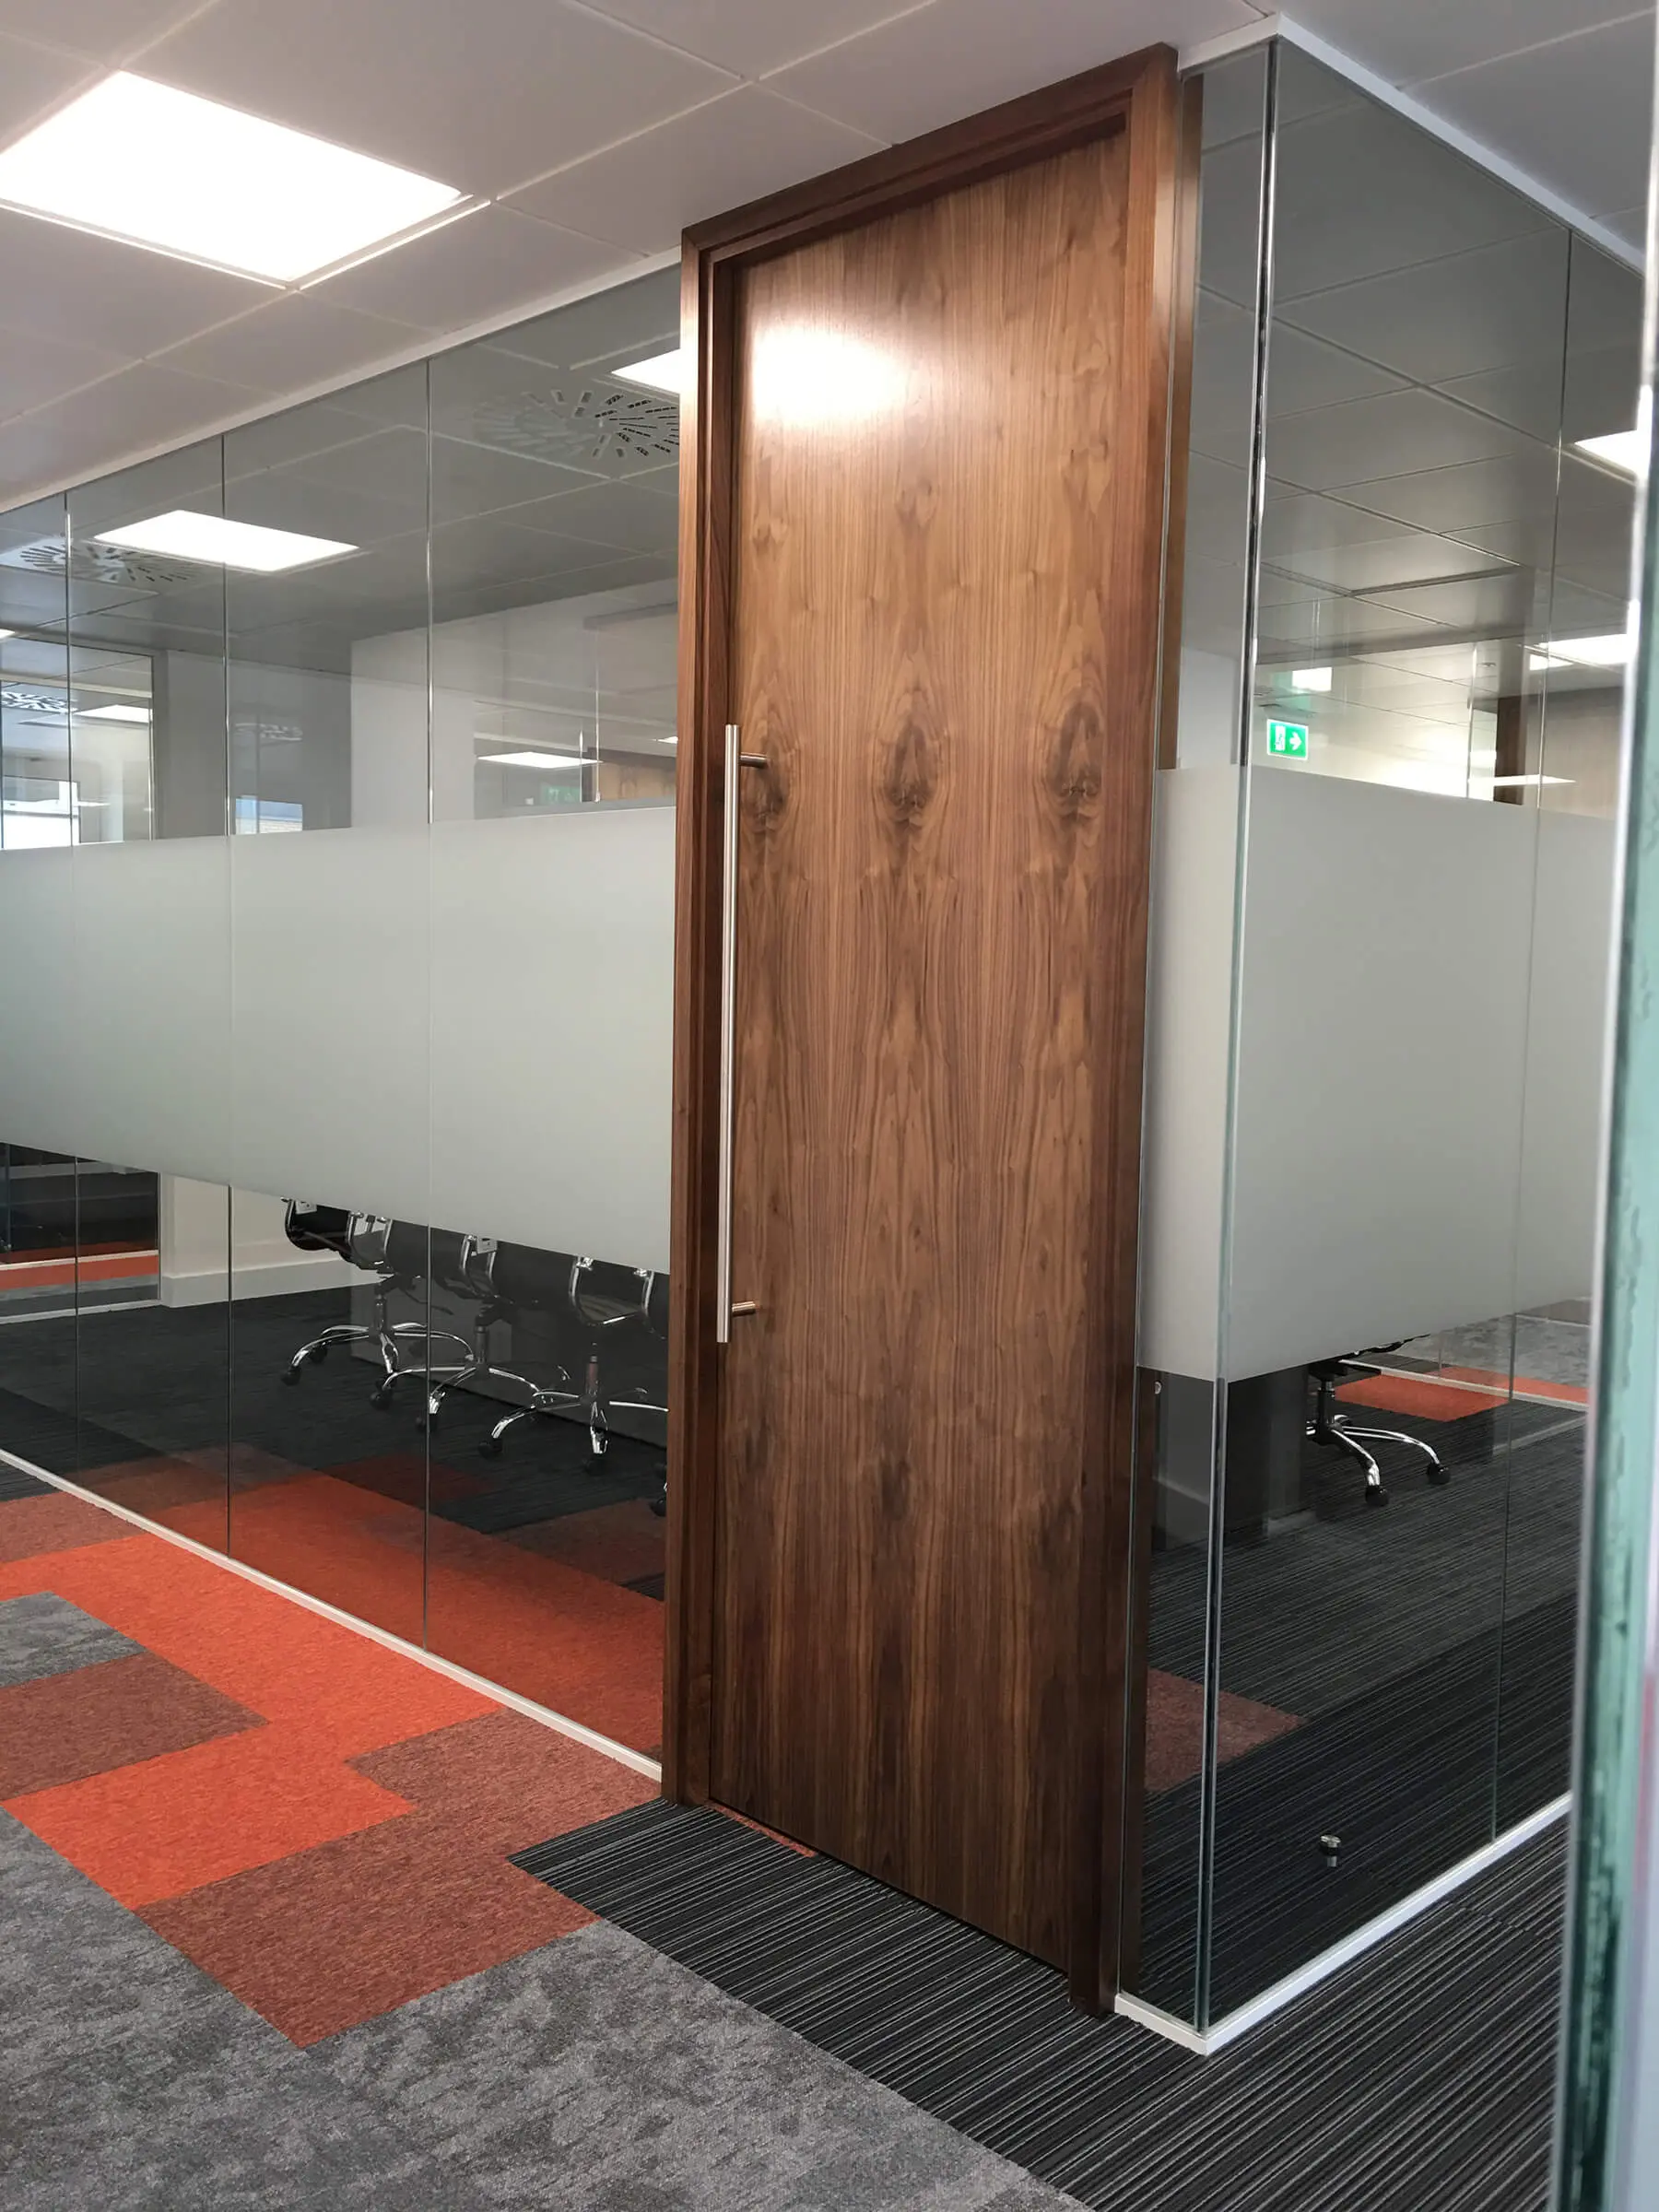 Meeting area with wood doors and glass partition